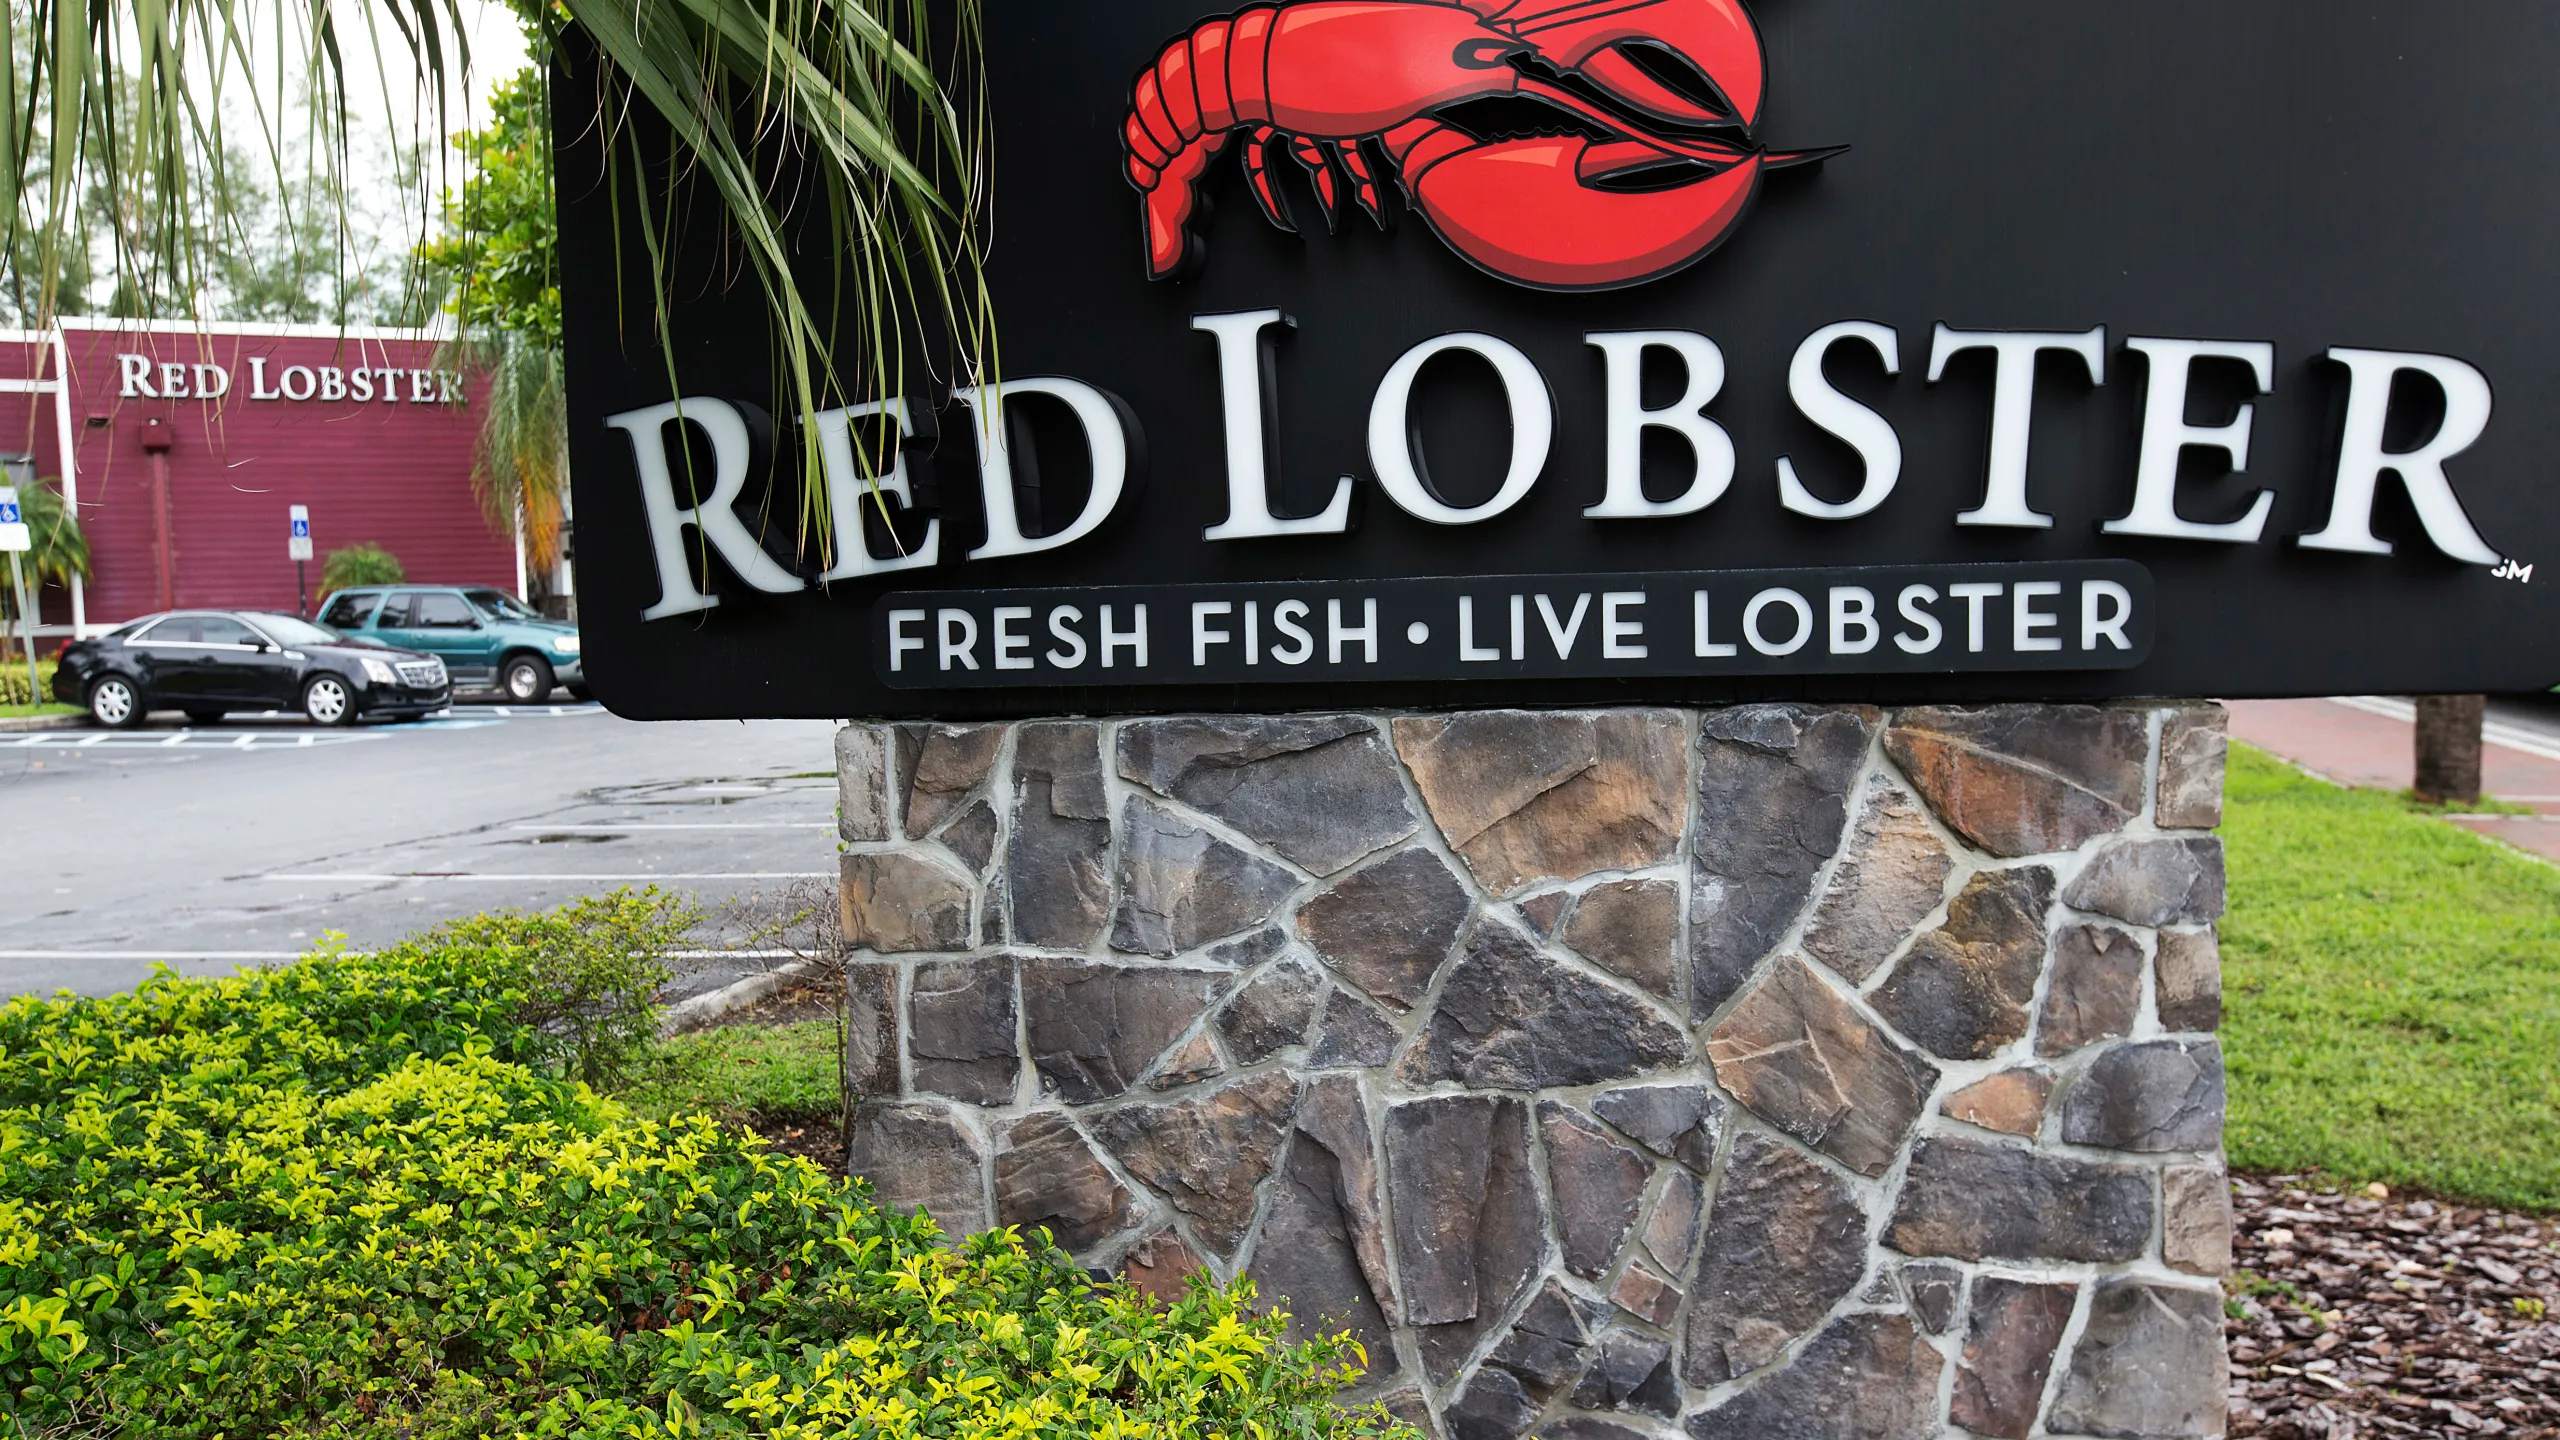 Why Did Red Lobster Close Its Doors Overnight? Shocking Job Losses and Legal Drama Unfold